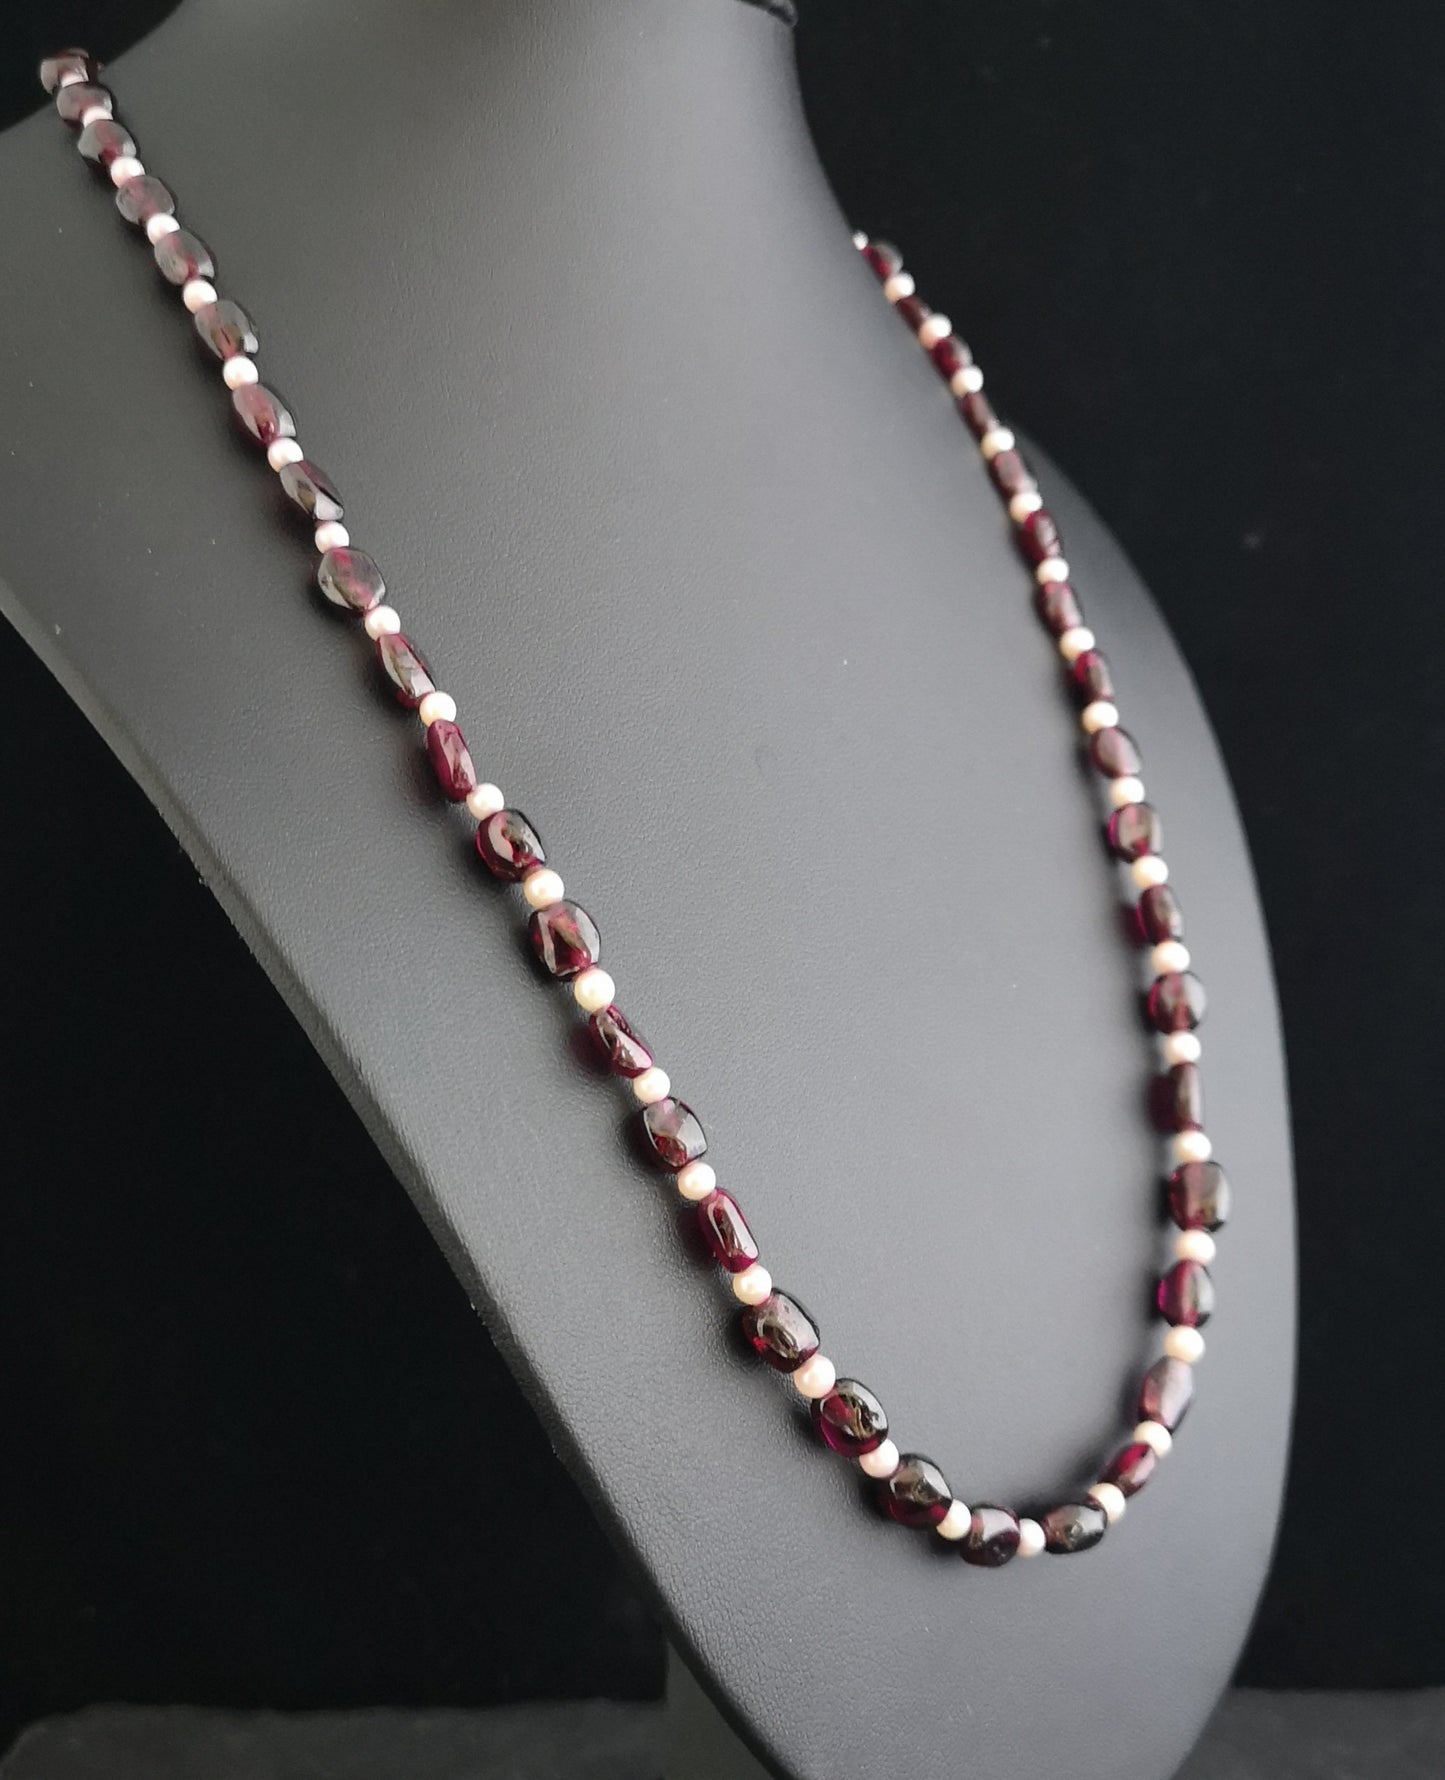 Vintage garnet and cultured pearl necklace, 9ct gold clasp